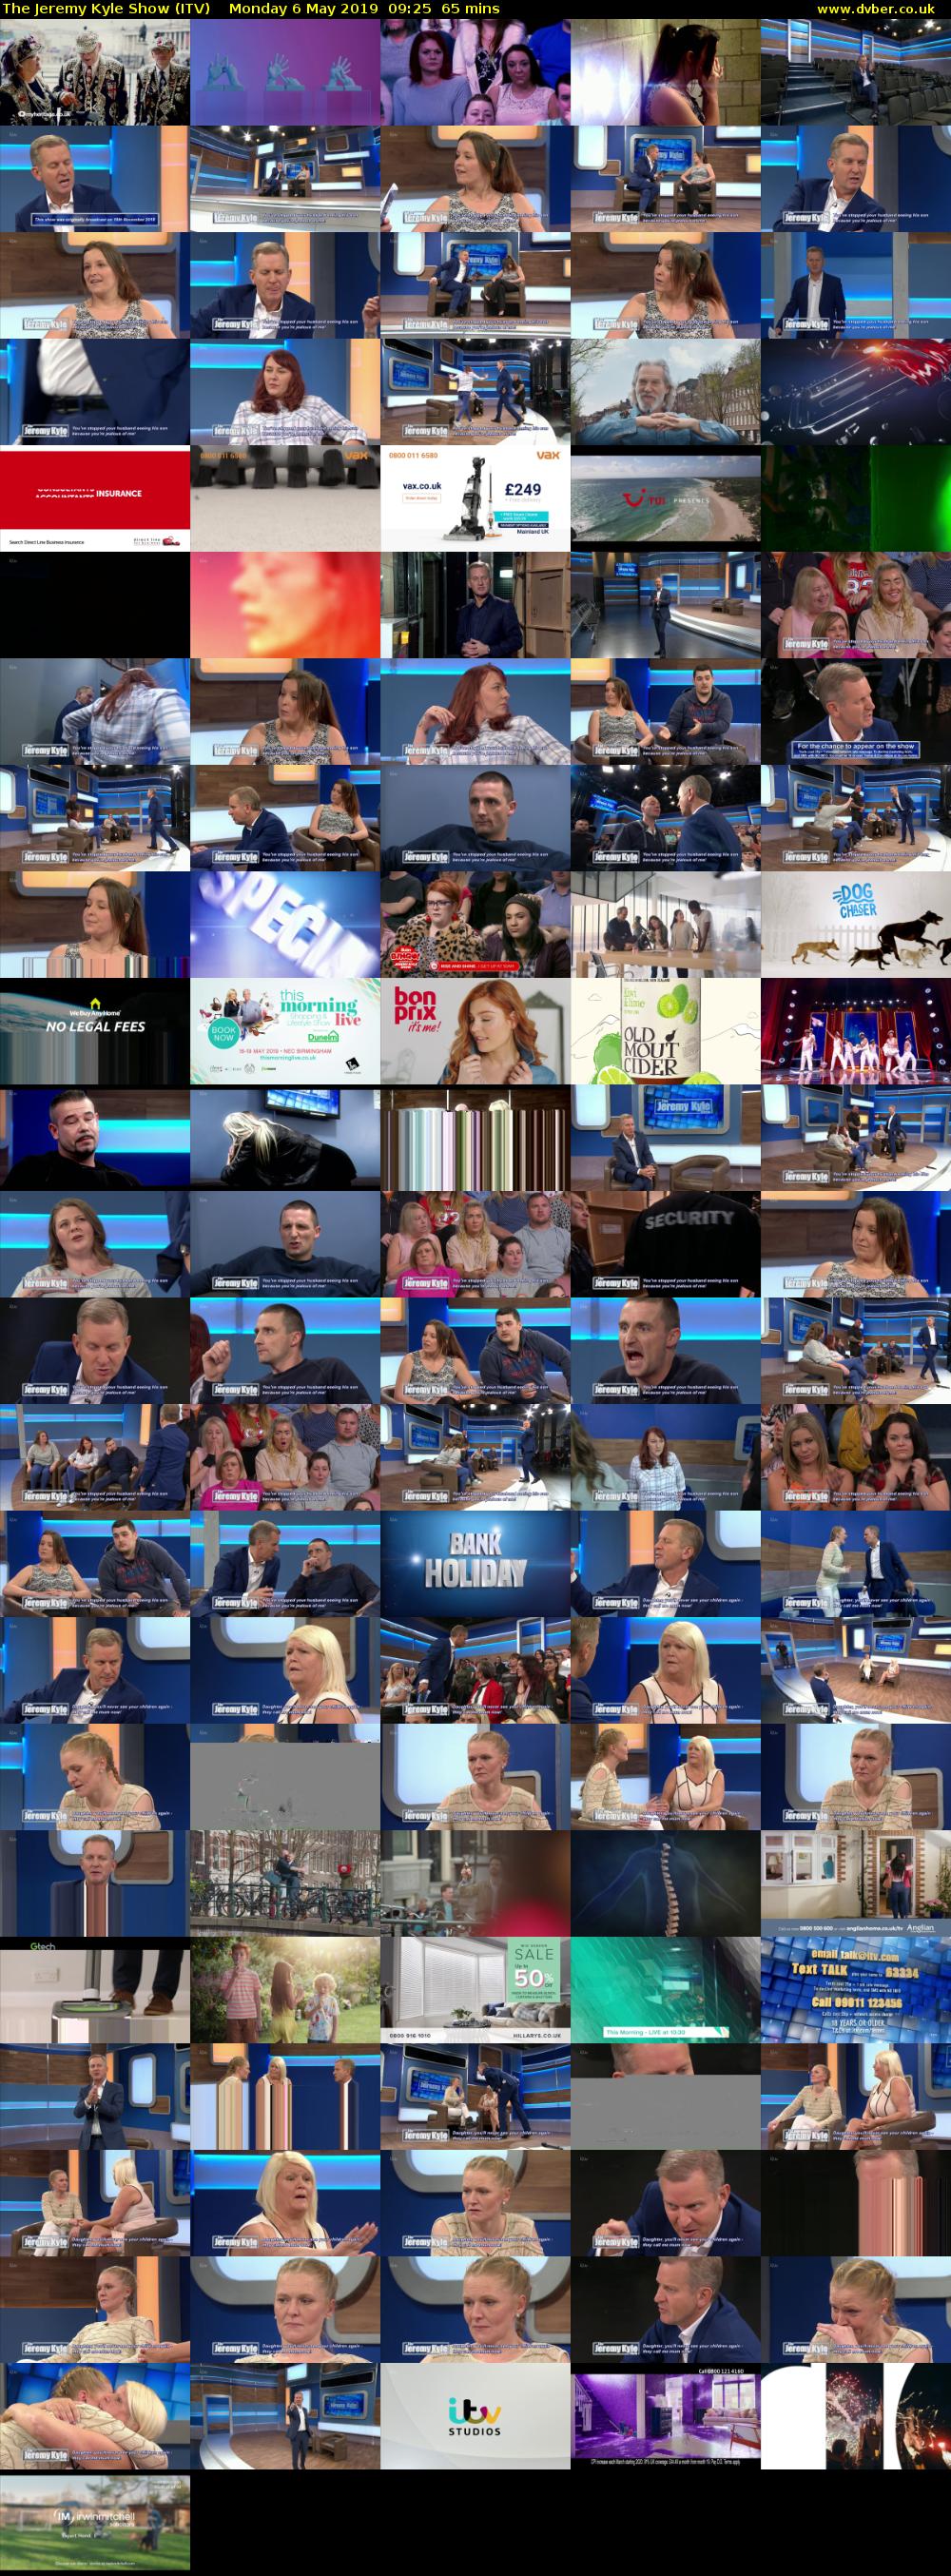 The Jeremy Kyle Show (ITV) Monday 6 May 2019 09:25 - 10:30